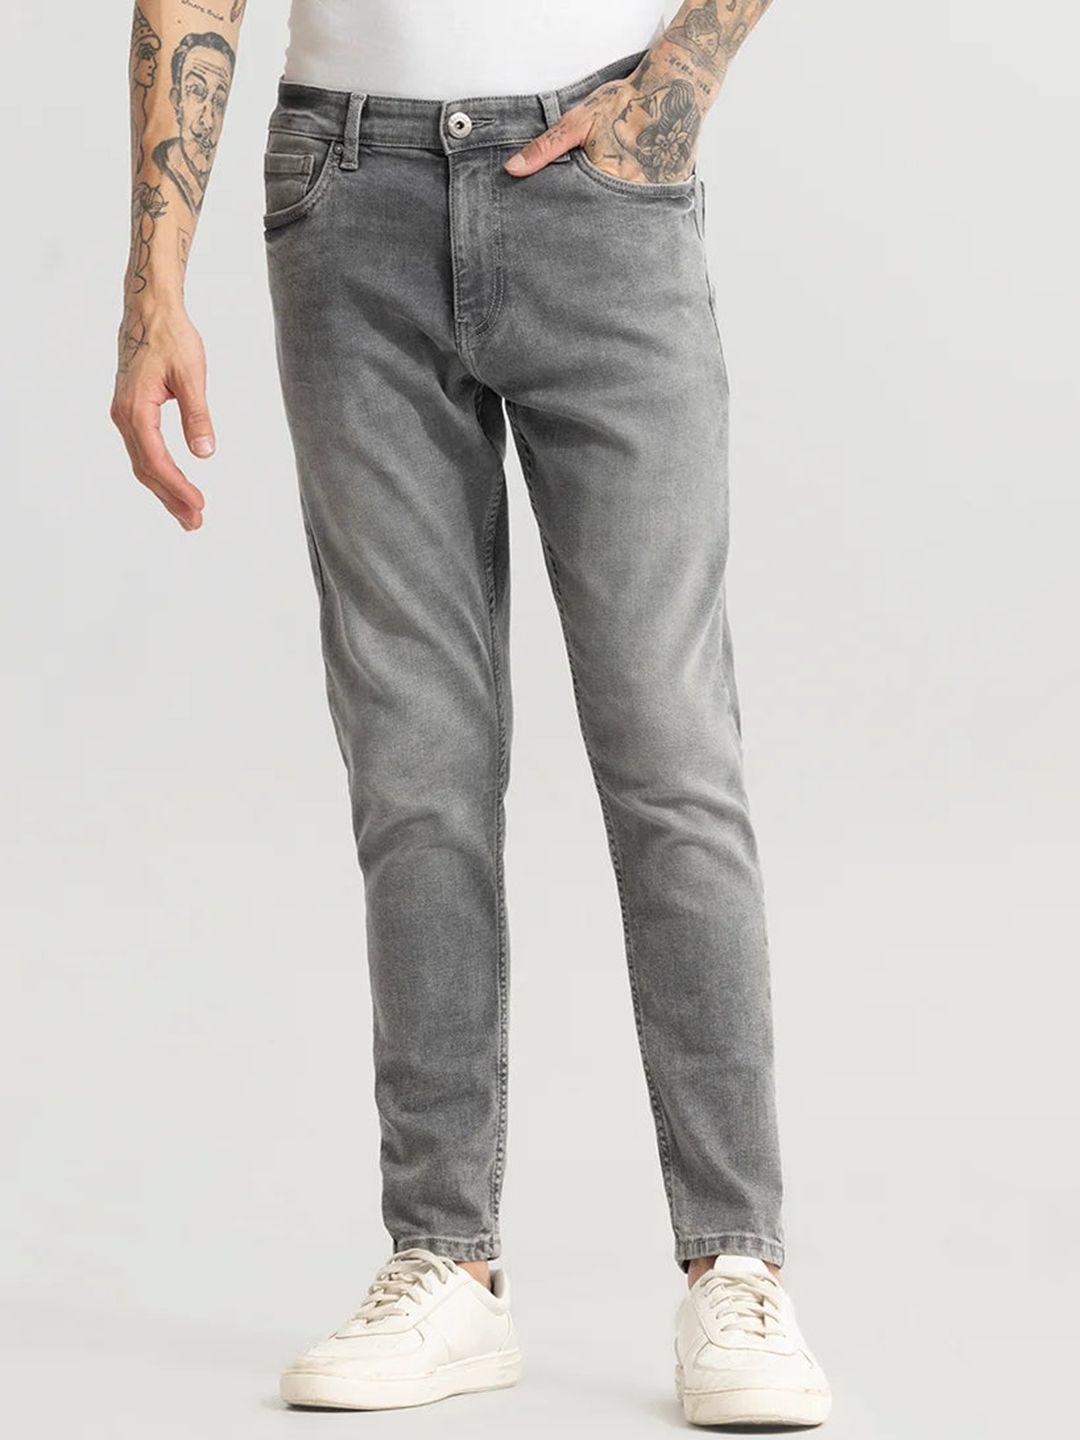 snitch-men-smart-slim-fit-clean-look-heavy-fade-stretchable-jeans